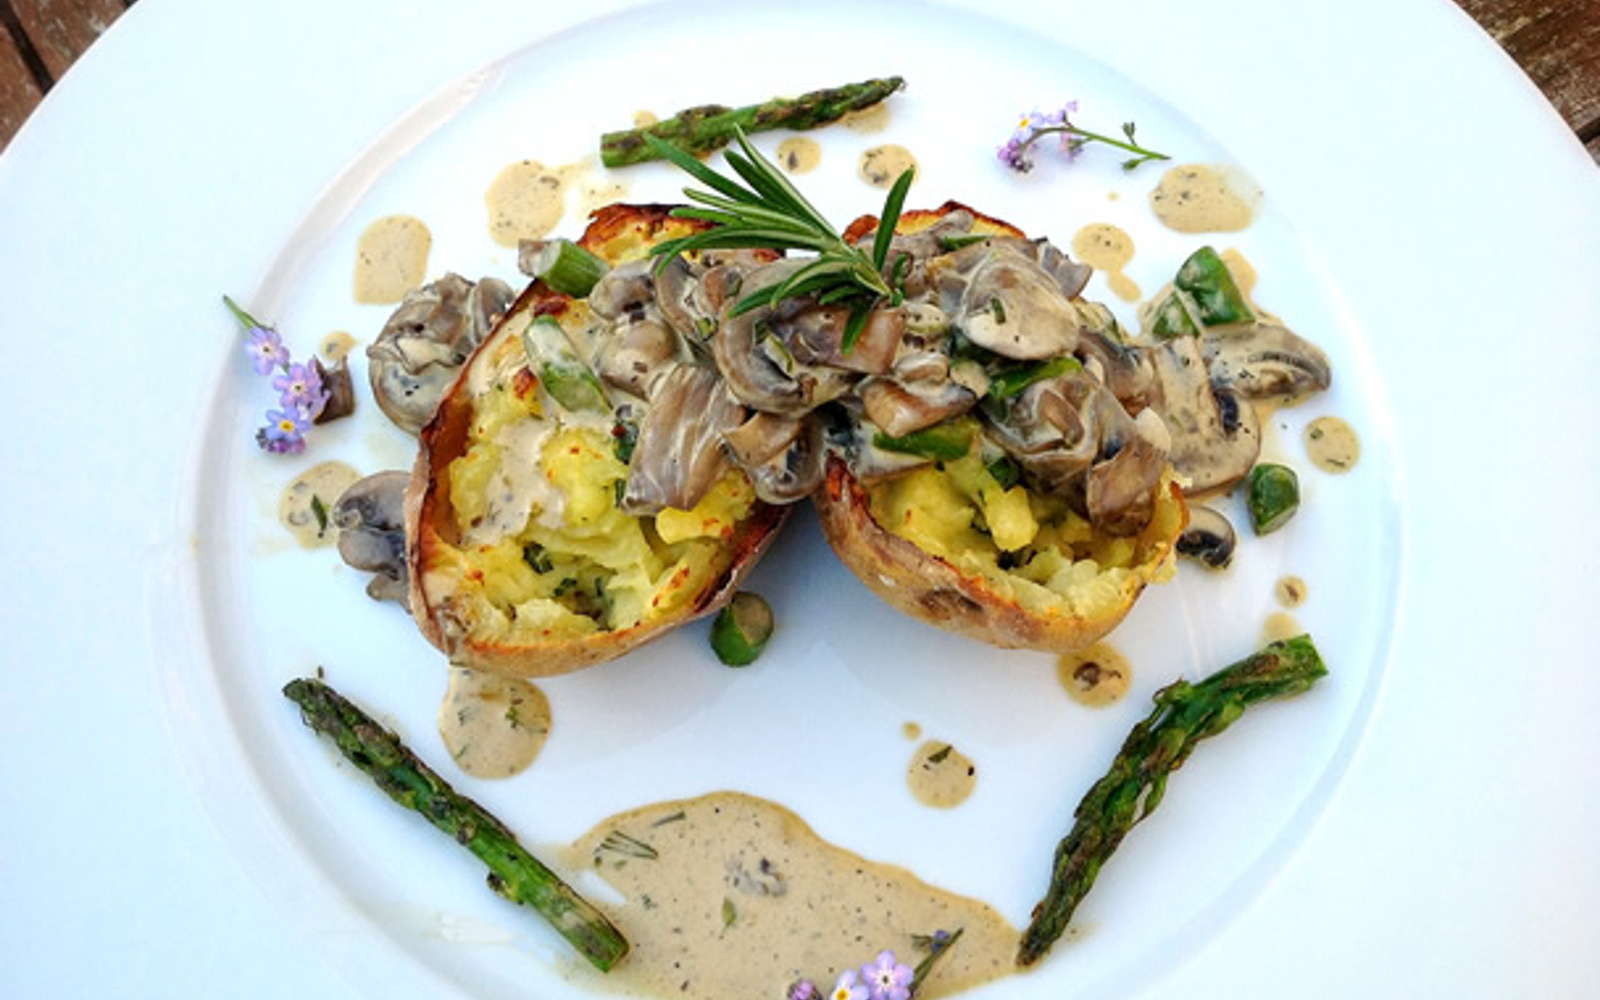 Twice Cooked Baked Potatoes With Asparagus and Mushroom Cream Sauce